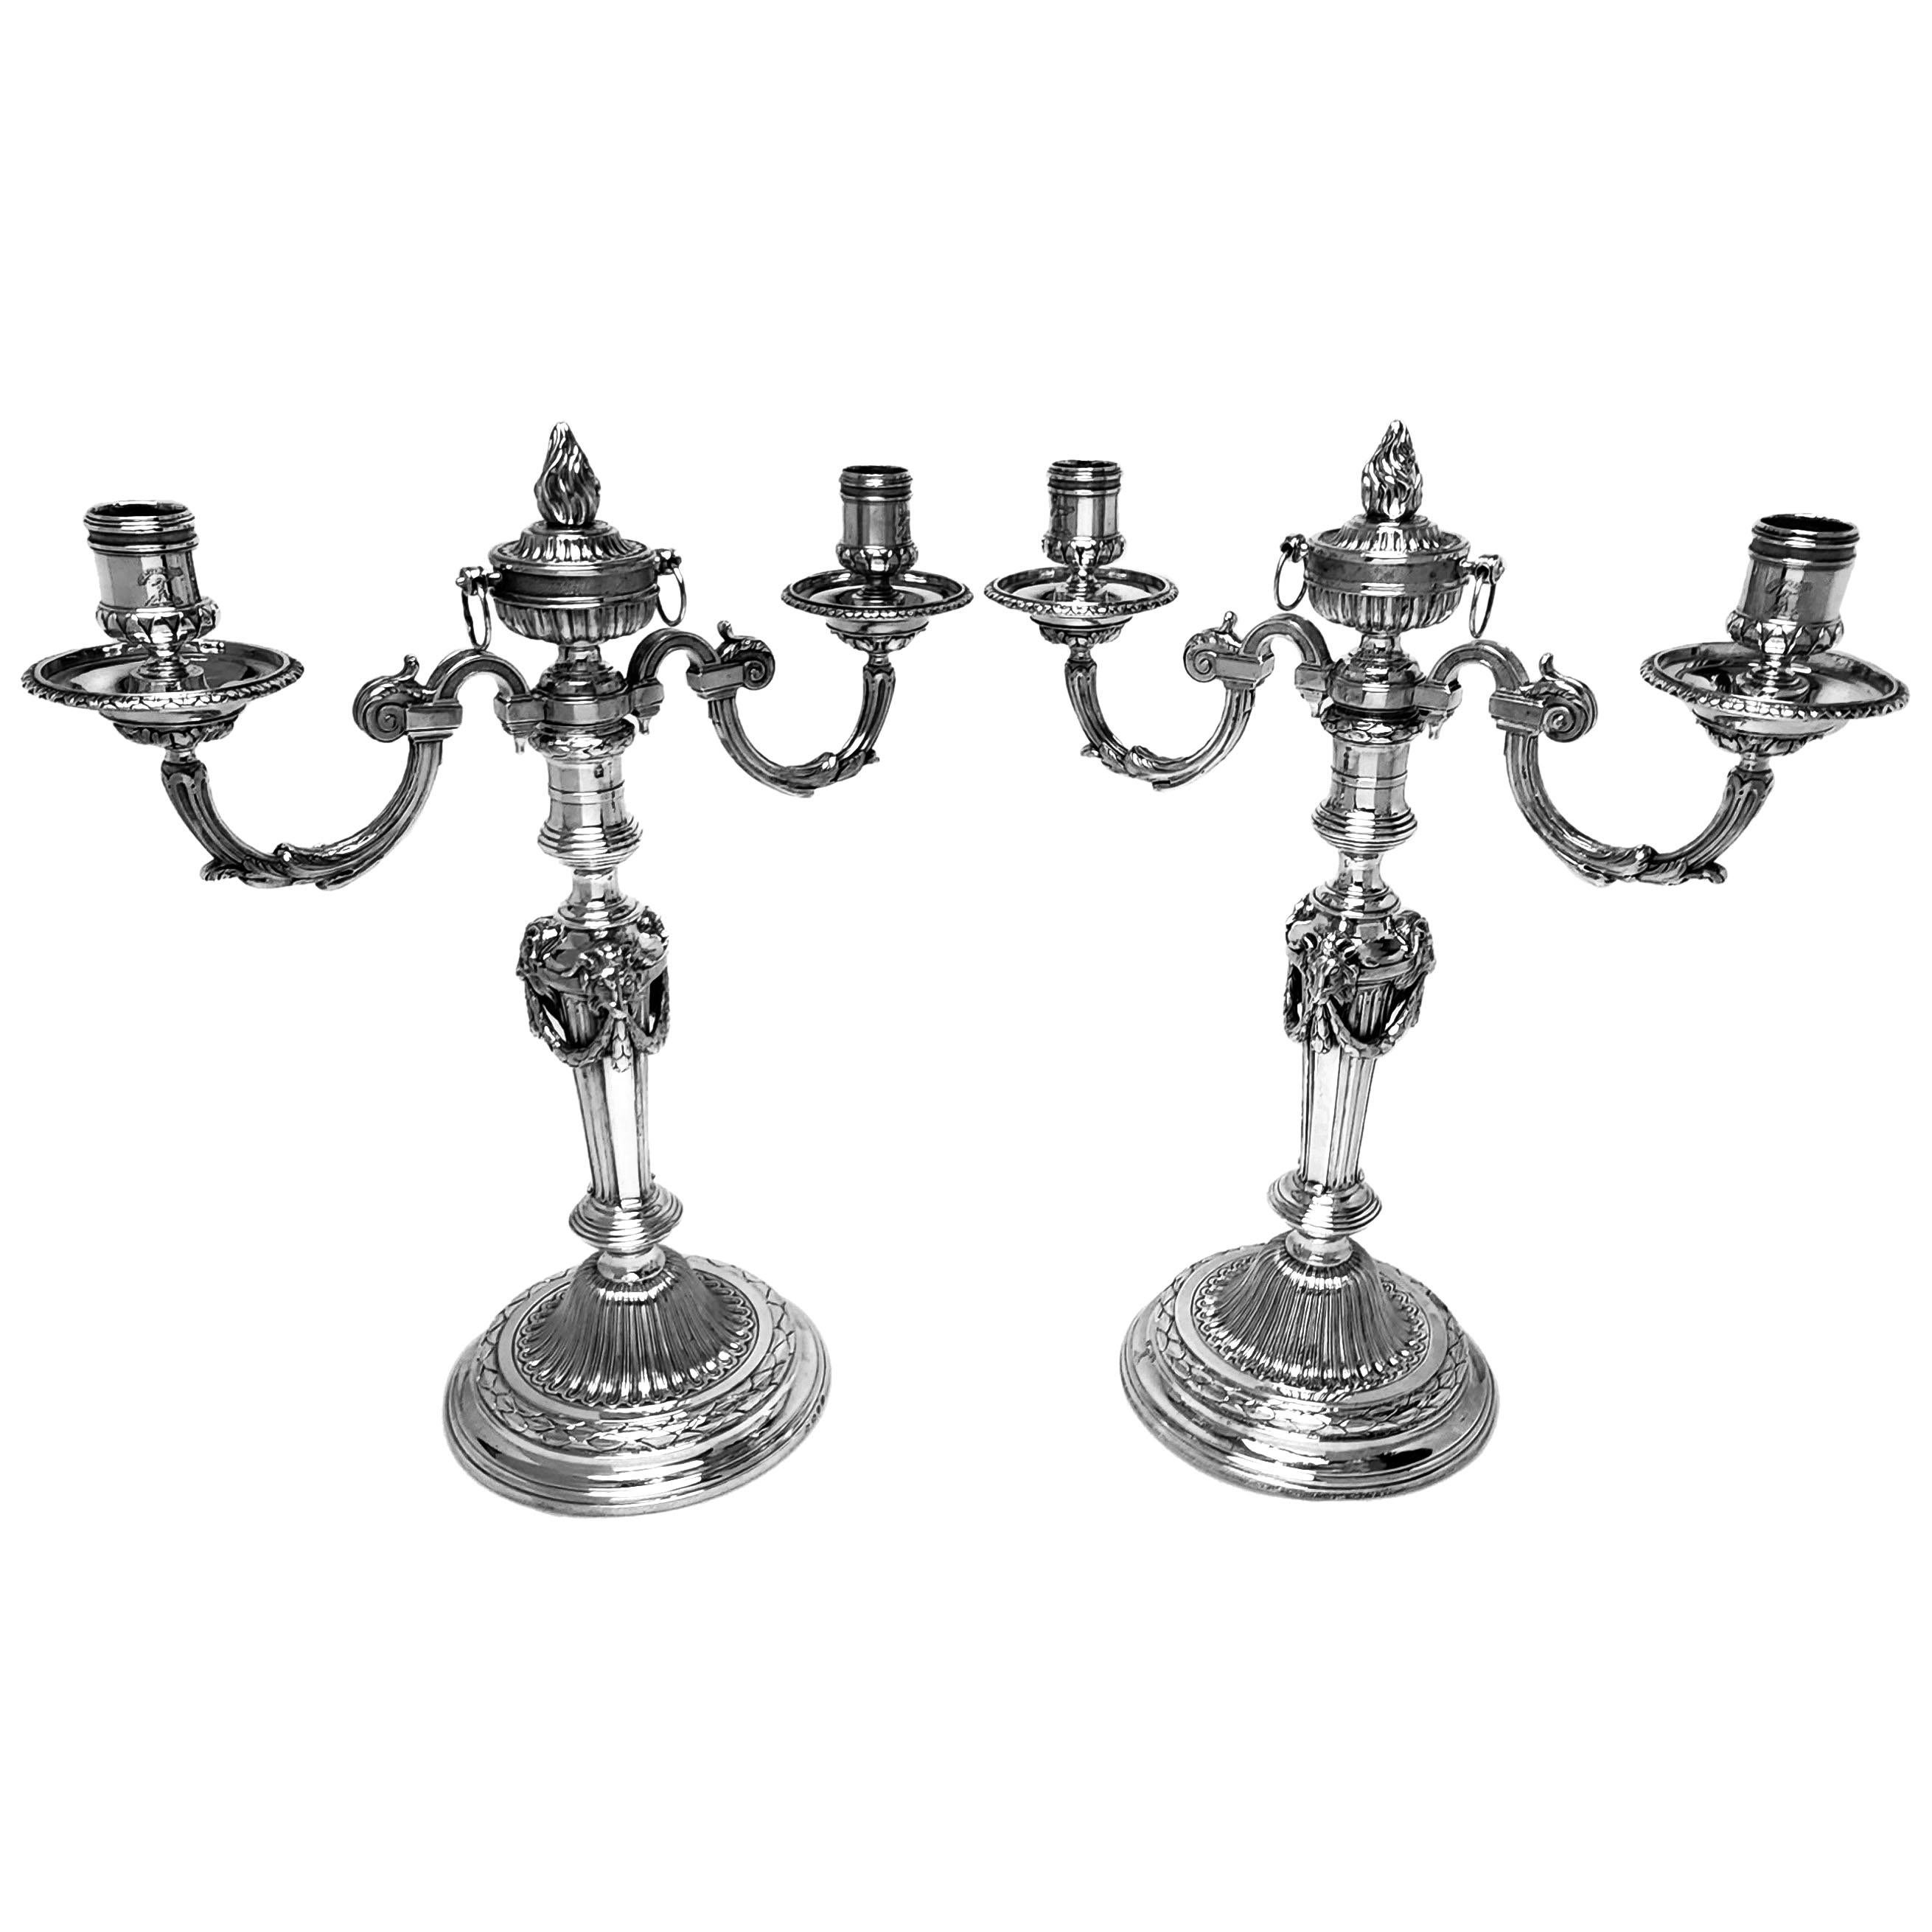 A pair of Magnificent George III Neo Classical Adam style Solid Silver Two Light Candelabra that are able to convert into Candlesticks with the removal of the branches. The Candelabra have round bases decorated with a stylised laurel leaf band. The